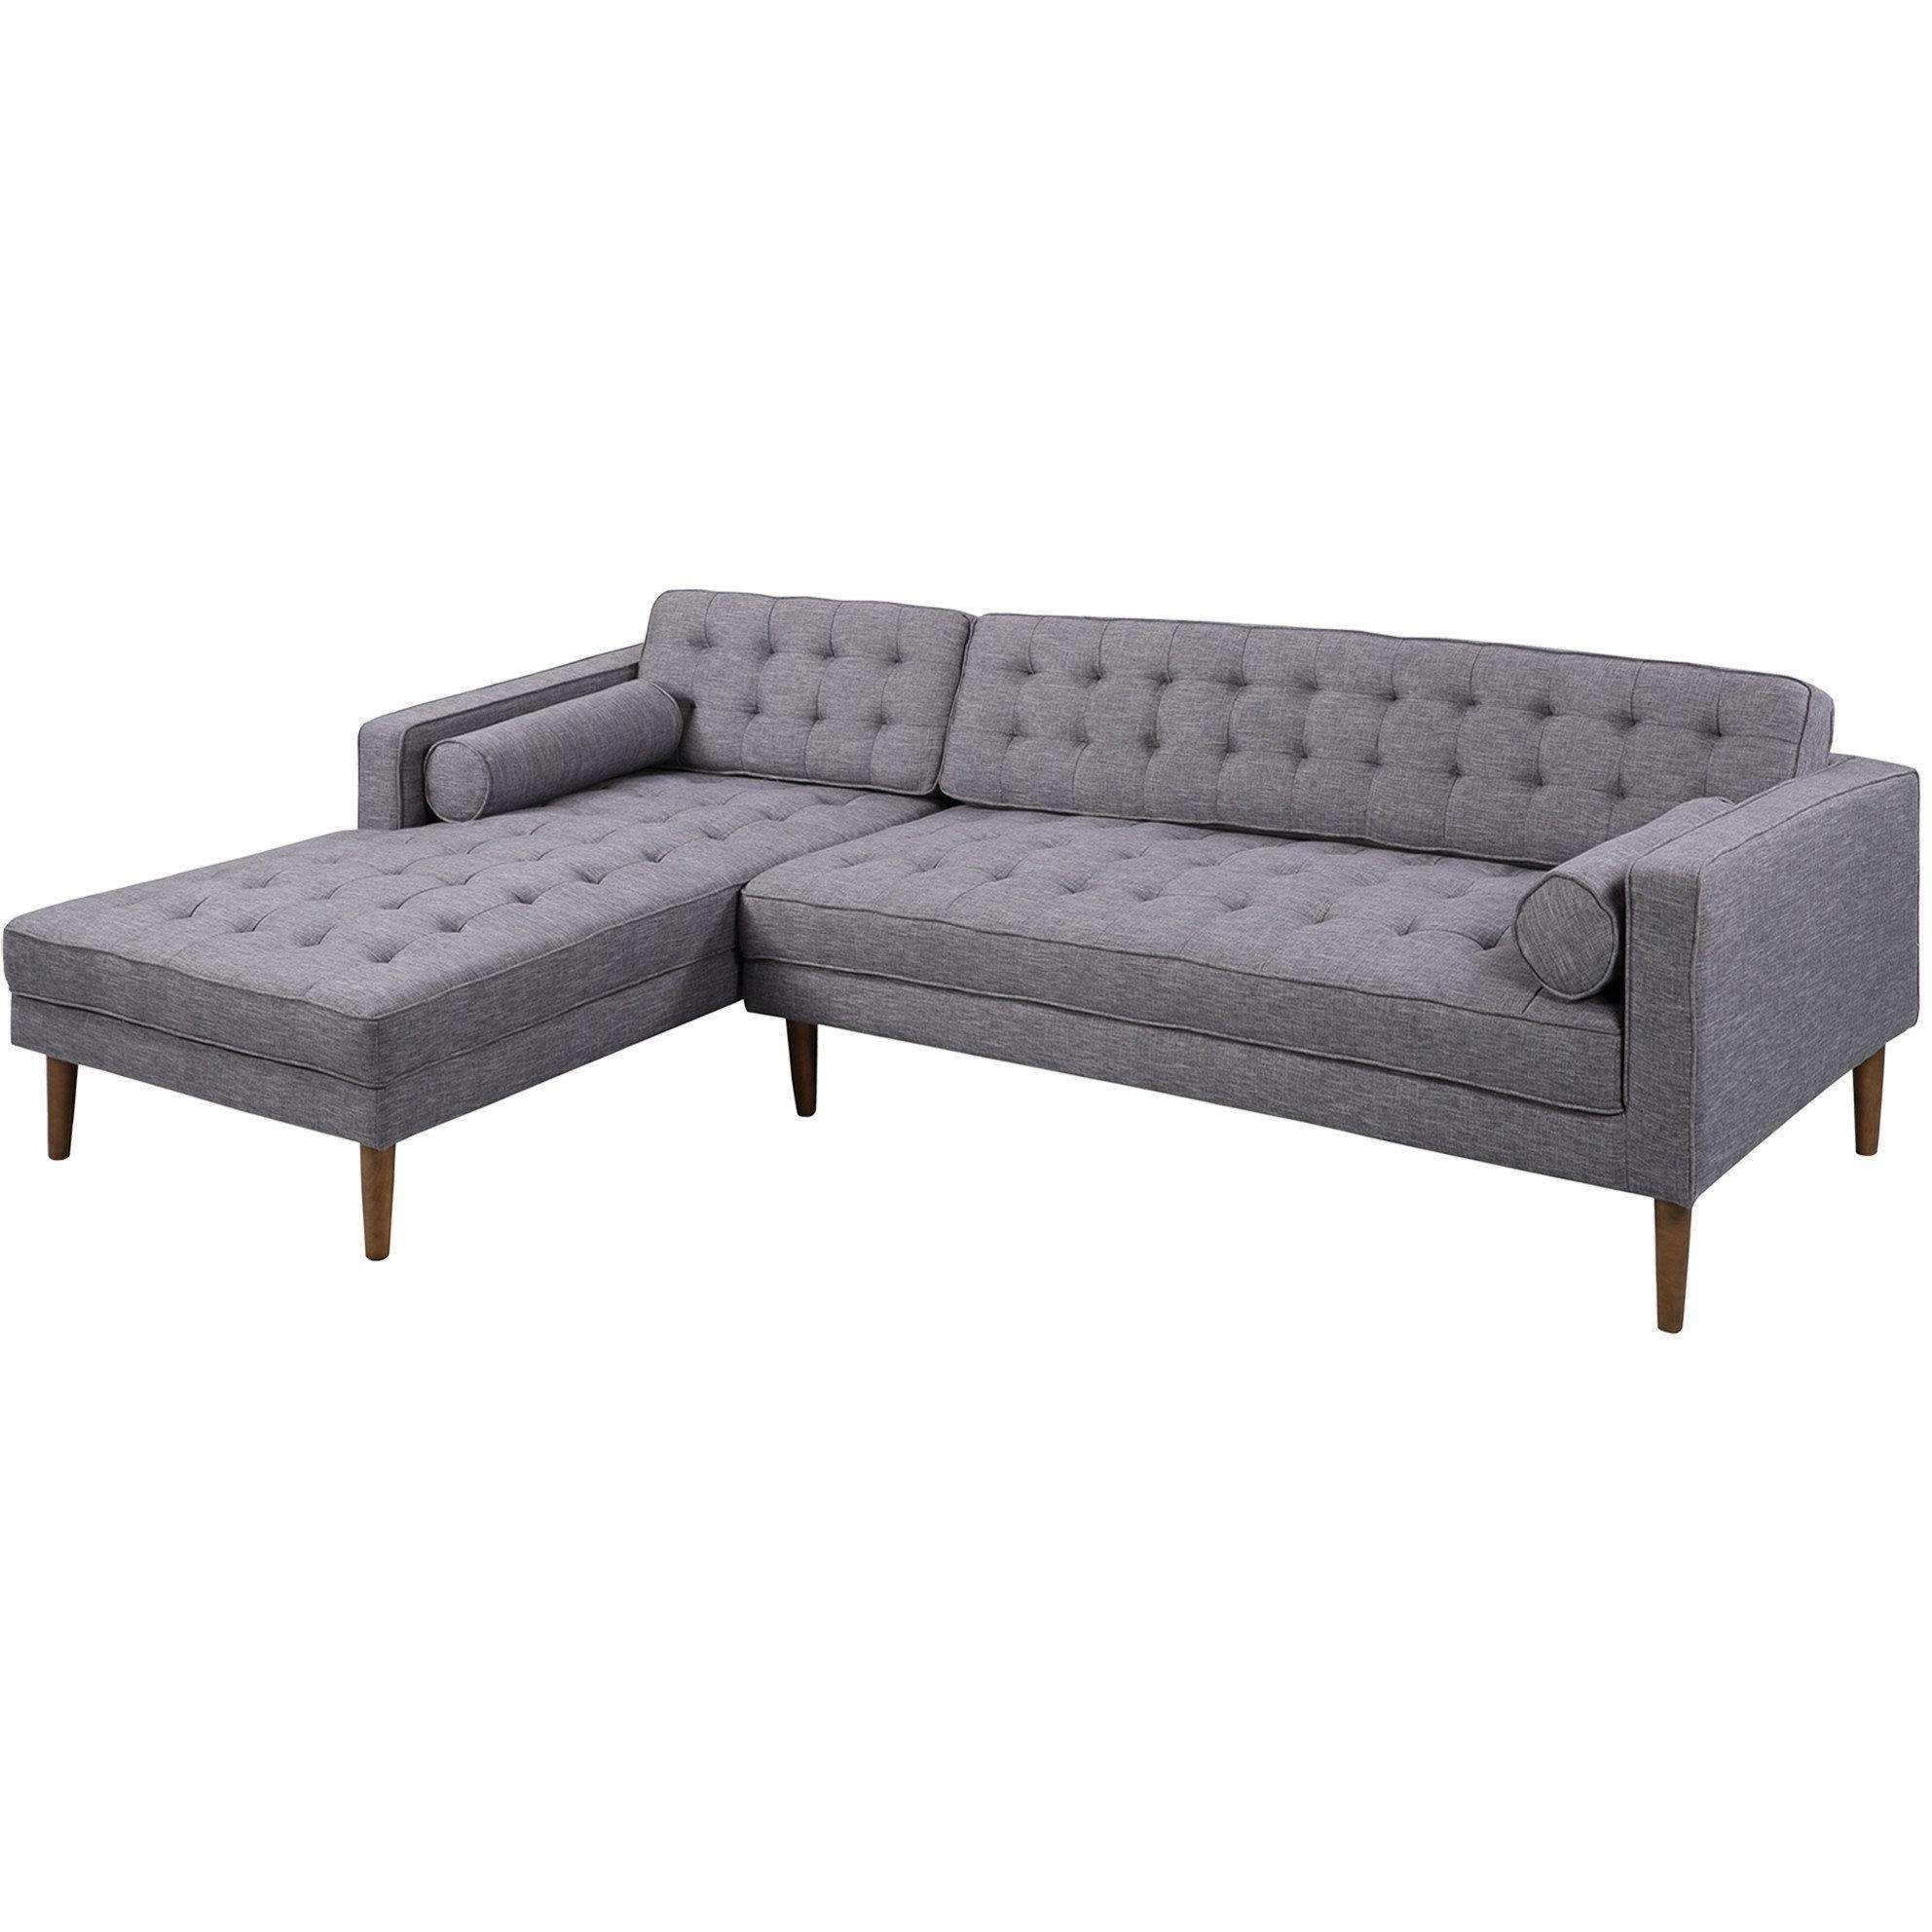 Armen Living Element Right Side Chaise Sectional In Dark Within Most Popular Element Right Side Chaise Sectional Sofas In Dark Gray Linen And Walnut Legs (View 1 of 25)